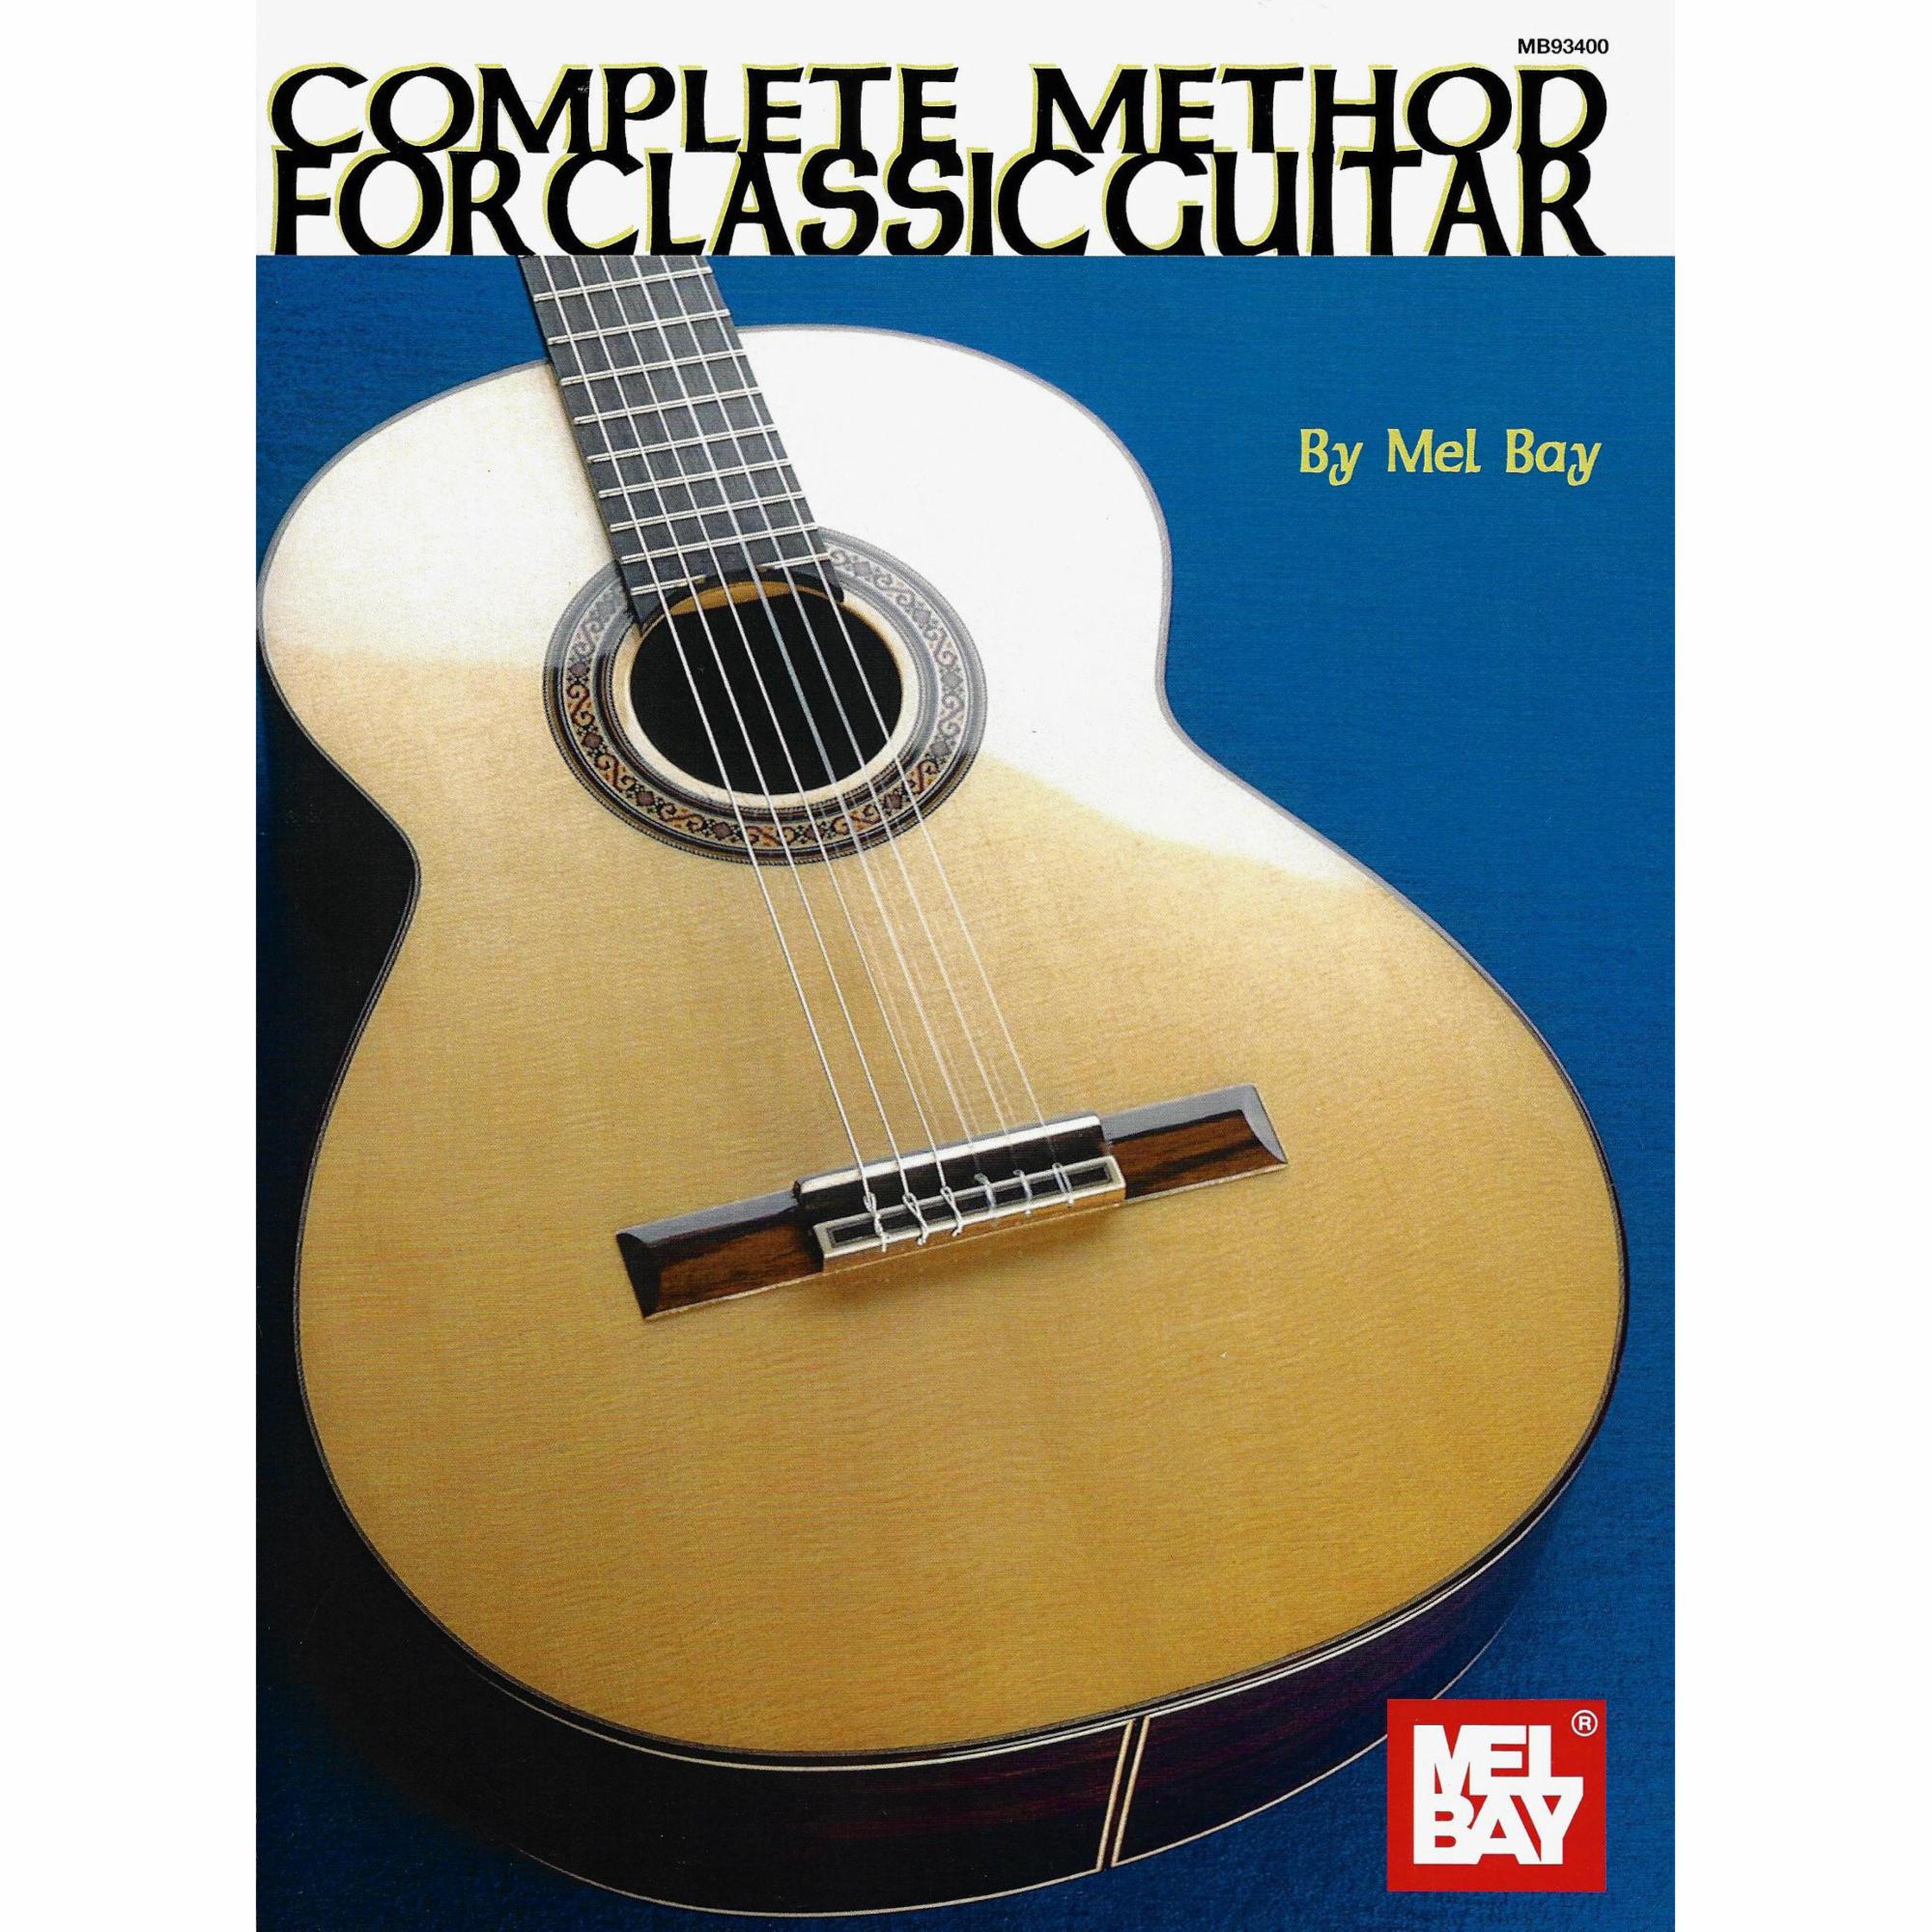 Complete Method for Classic Guitar